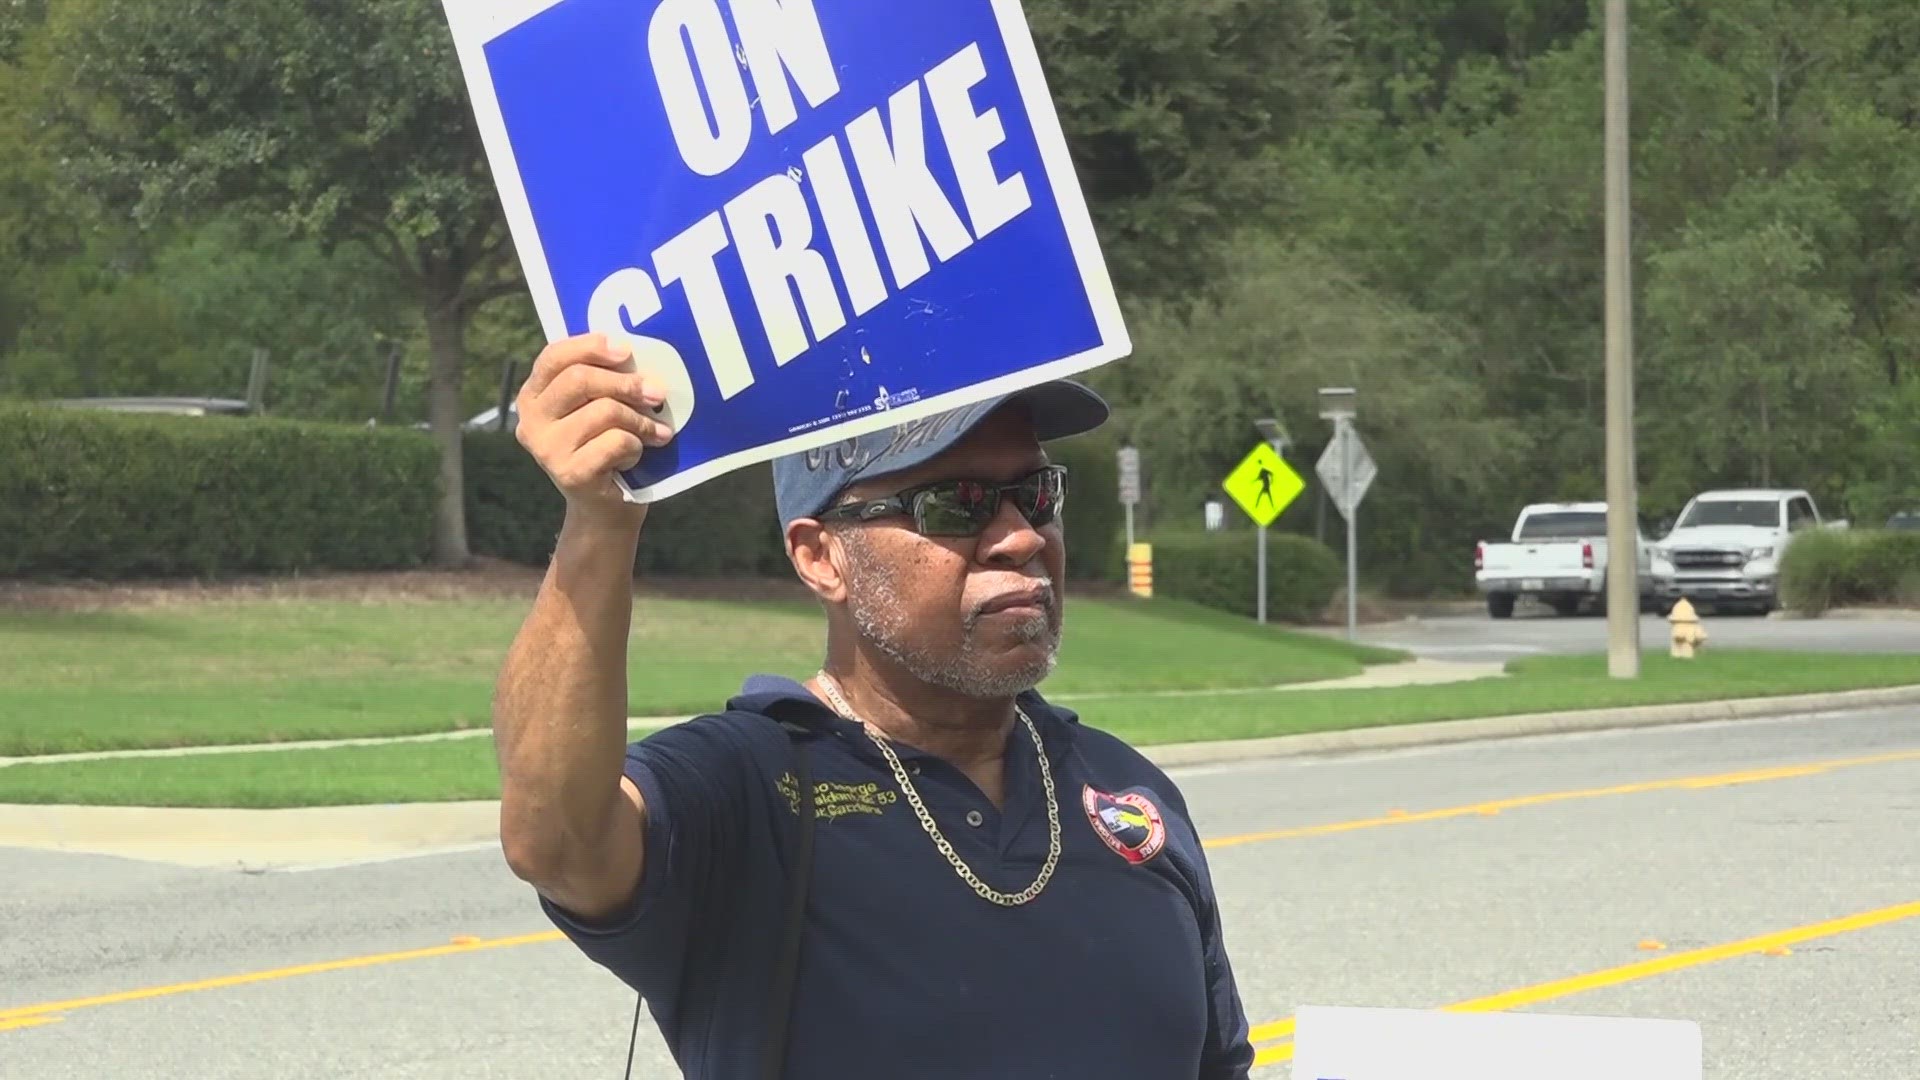 The North Florida Central Labor Council picketed alongside employees Friday afternoon outside the distribution center on the city’s west side.